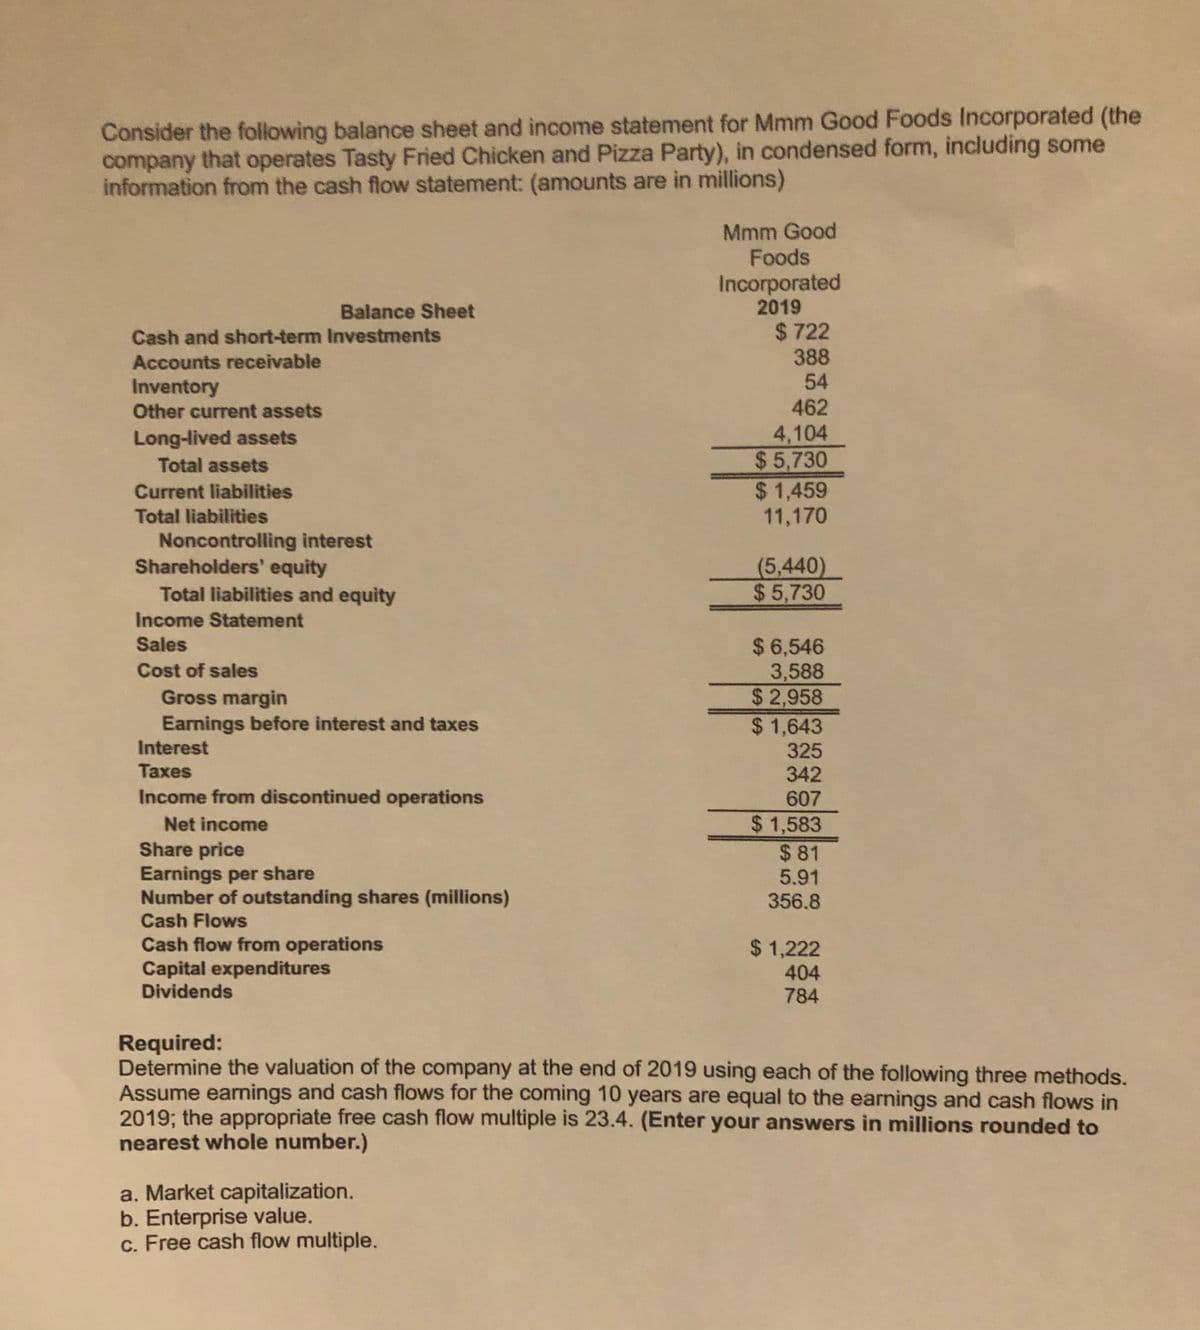 Consider the following balance sheet and income statement for Mmm Good Foods Incorporated (the
company that operates Tasty Fried Chicken and Pizza Party), in condensed form, including some
information from the cash flow statement: (amounts are in millions)
Mmm Good
Foods
Incorporated
2019
Balance Sheet
$ 722
388
54
462
Cash and short-term Investments
Accounts receivable
Inventory
Other current assets
4,104
$5,730
$1,459
11,170
Long-lived assets
Total assets
Current liabilities
Total liabilities
Noncontrolling interest
Shareholders' equity
Total liabilities and equity
(5,440)
$5,730
Income Statement
Sales
$ 6,546
3,588
$2,958
$ 1,643
Cost of sales
Gross margin
Earnings before interest and taxes
Interest
325
342
Taxes
Income from discontinued operations
607
$1,583
$ 81
5.91
356.8
Net income
Share price
Earnings per share
Number of outstanding shares (millions)
Cash Flows
Cash flow from operations
Capital expenditures
Dividends
$ 1,222
404
784
Required:
Determine the valuation of the company at the end of 2019 using each of the following three methods.
Assume earnings and cash flows for the coming 10 years are equal to the earnings and cash flows in
2019; the appropriate free cash flow multiple is 23.4. (Enter your answers in millions rounded to
nearest whole number.)
a. Market capitalization.
b. Enterprise value.
c. Free cash flow multiple.
